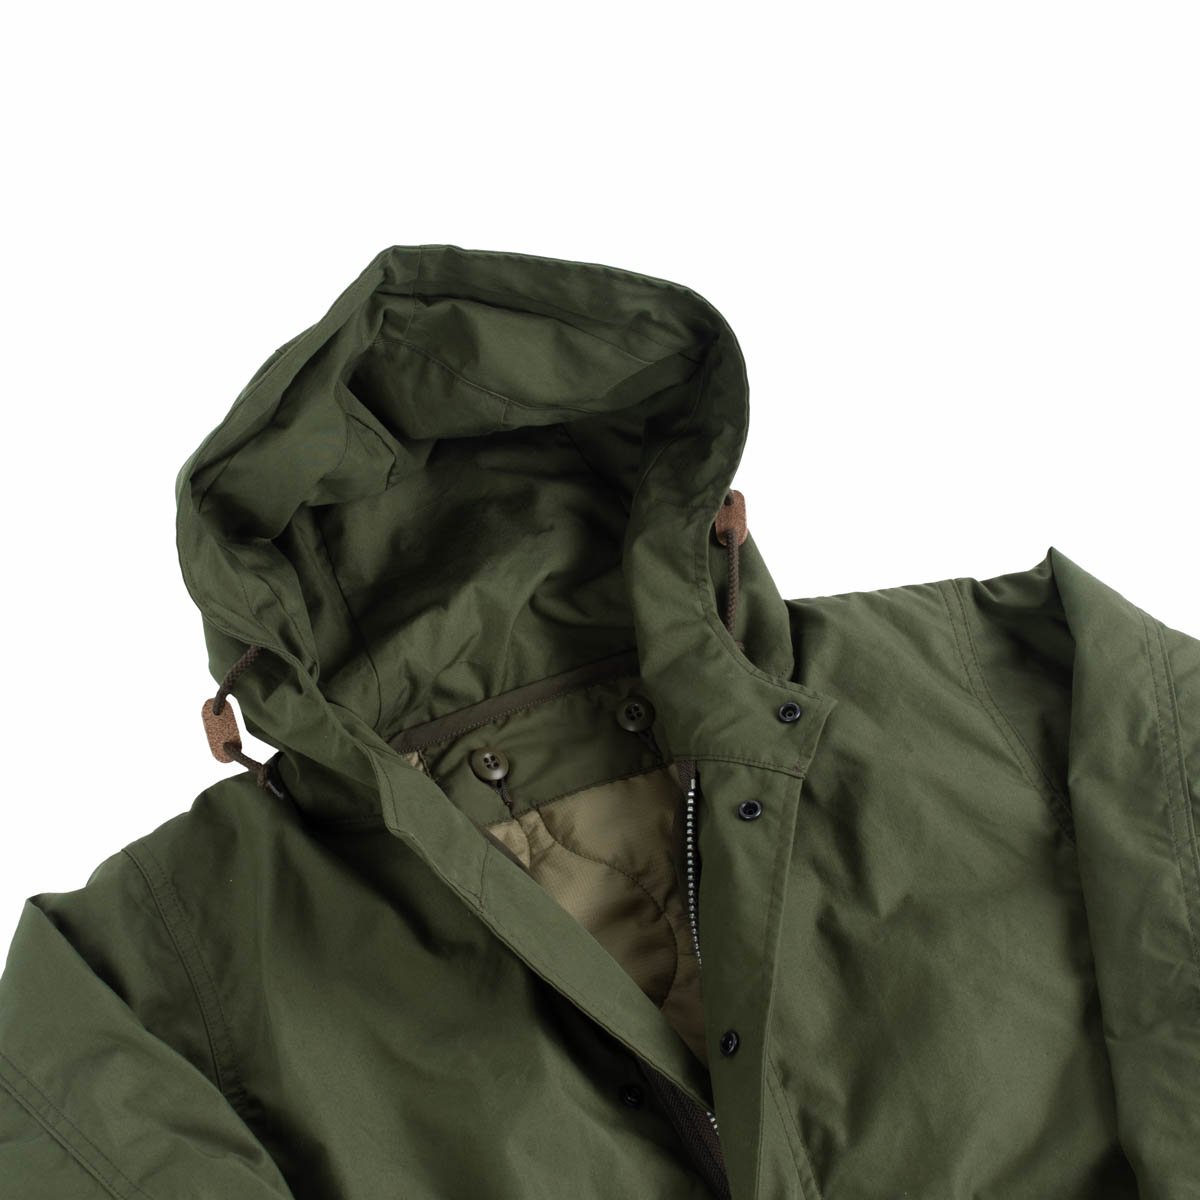 IHM-38-OLV 5oz Quilted Lining M-51 Type Field Coat Olive